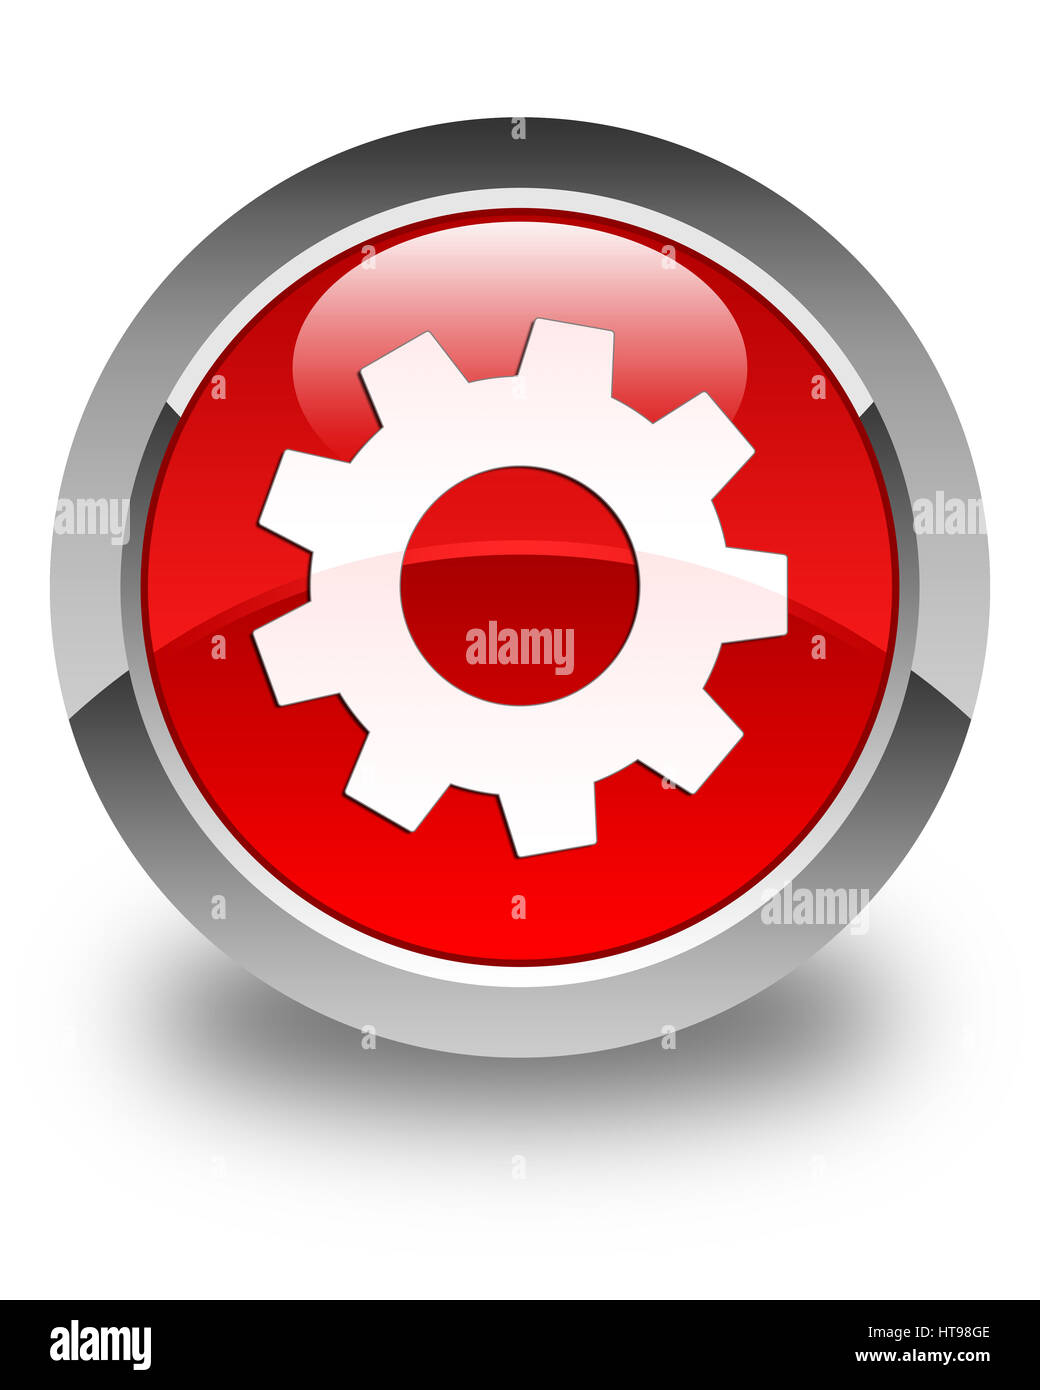 Process icon isolated on glossy red round button abstract illustration Stock Photo